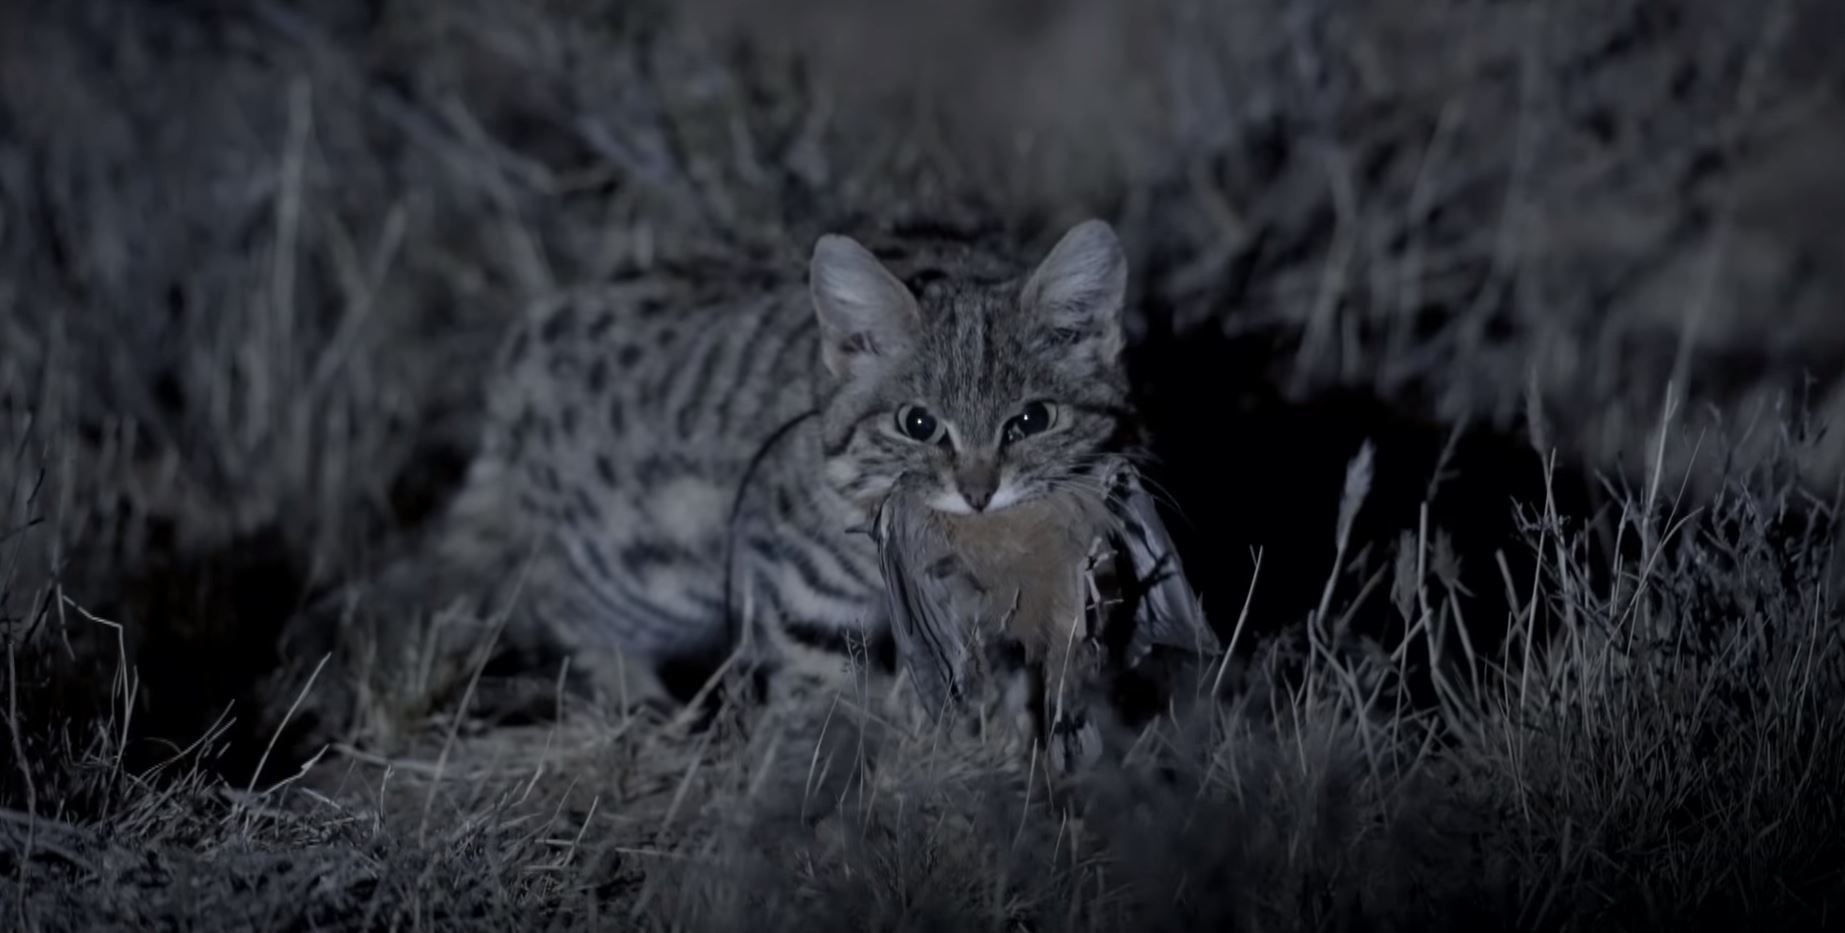 Black-footed cat